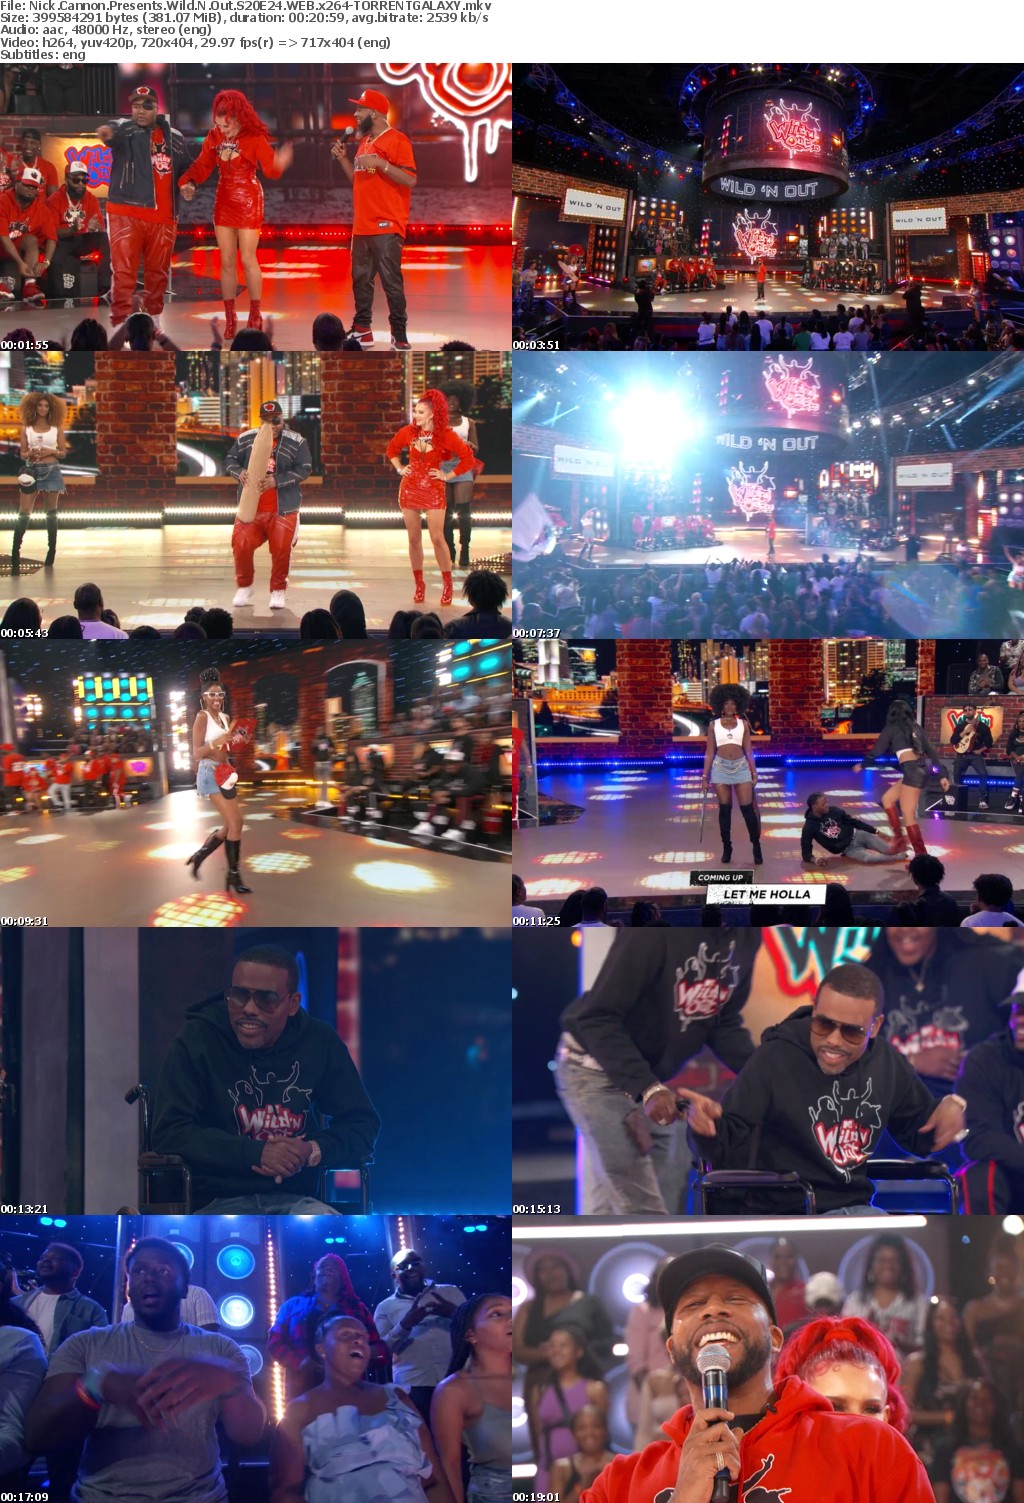 Nick Cannon Presents Wild N Out S20E24 WEB x264-GALAXY